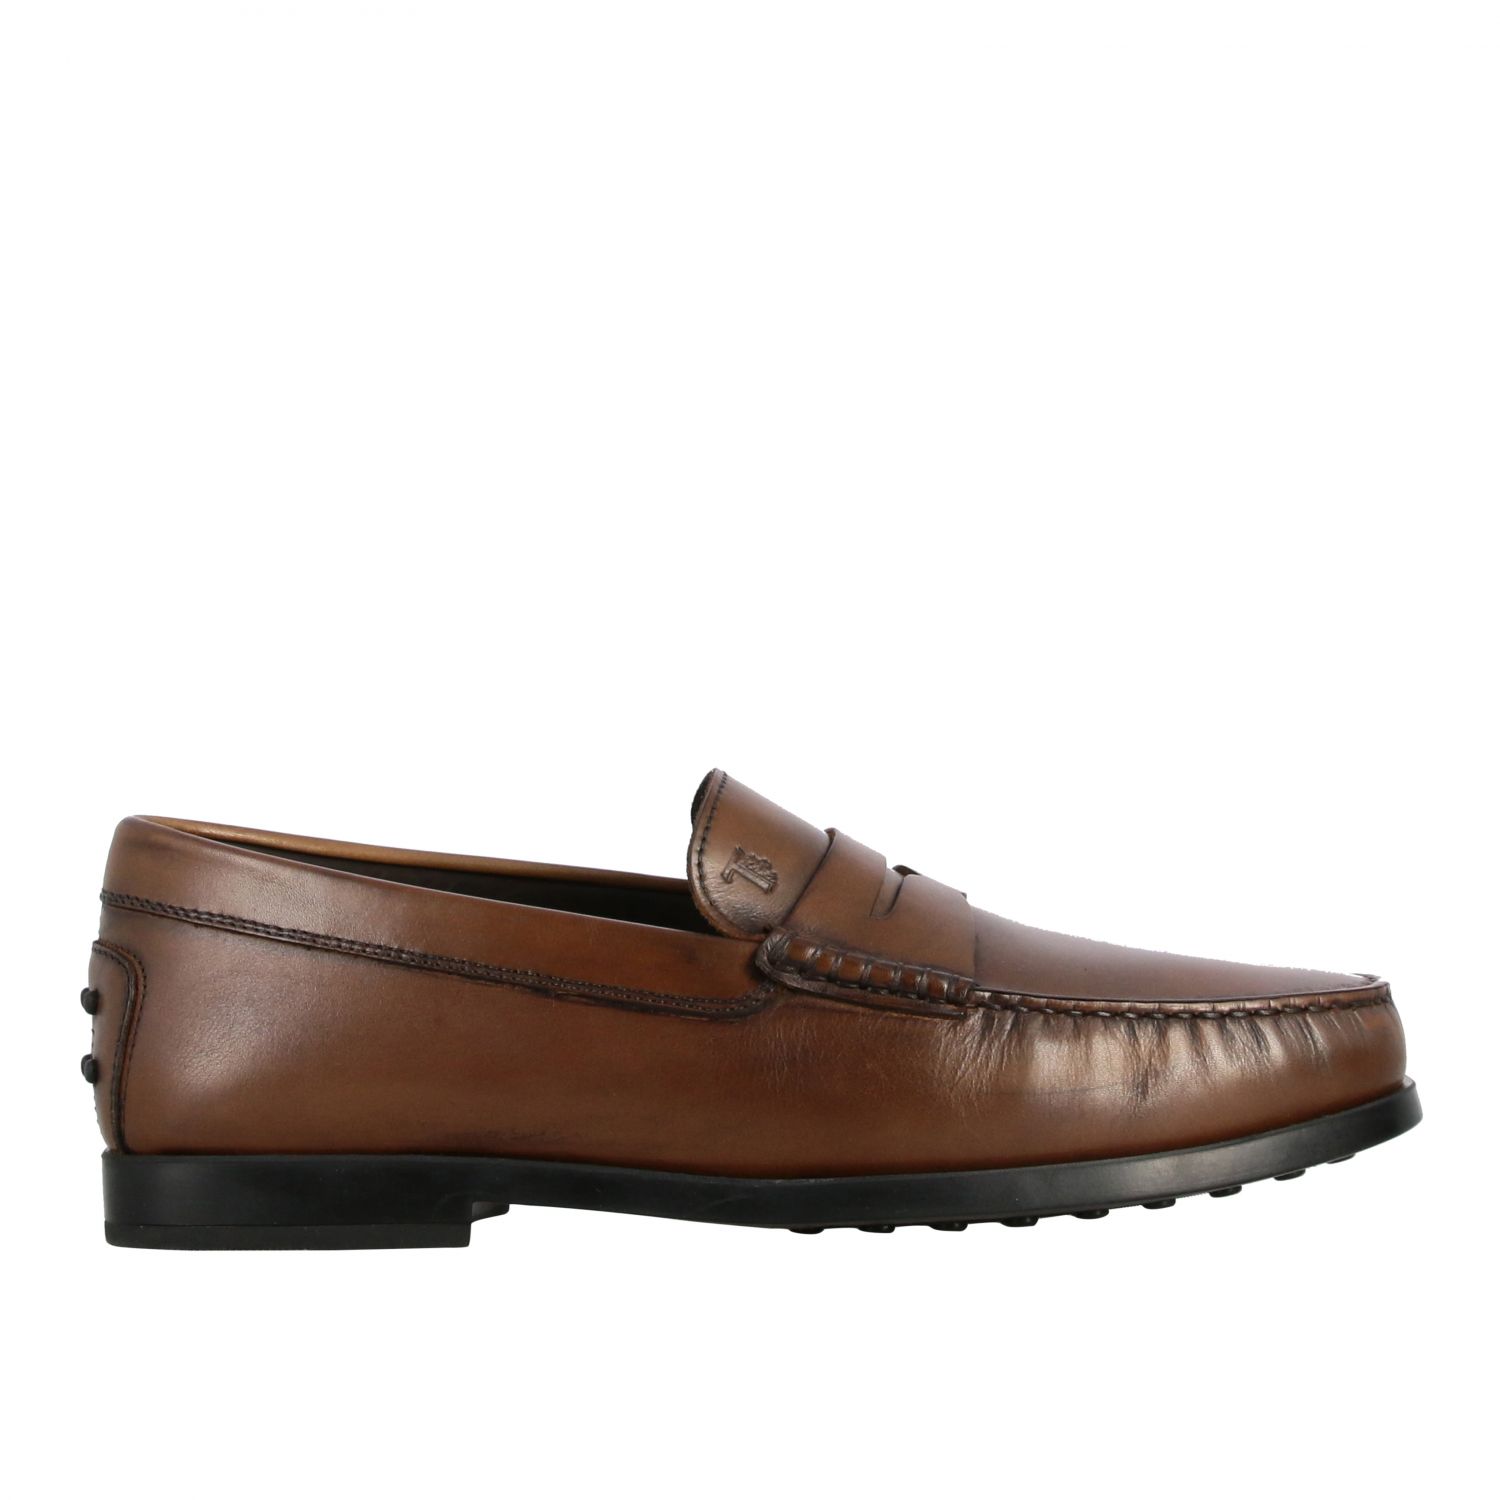 Tod's gommini leather loafer | Loafers Tods Men Dark | Loafers Tods ...